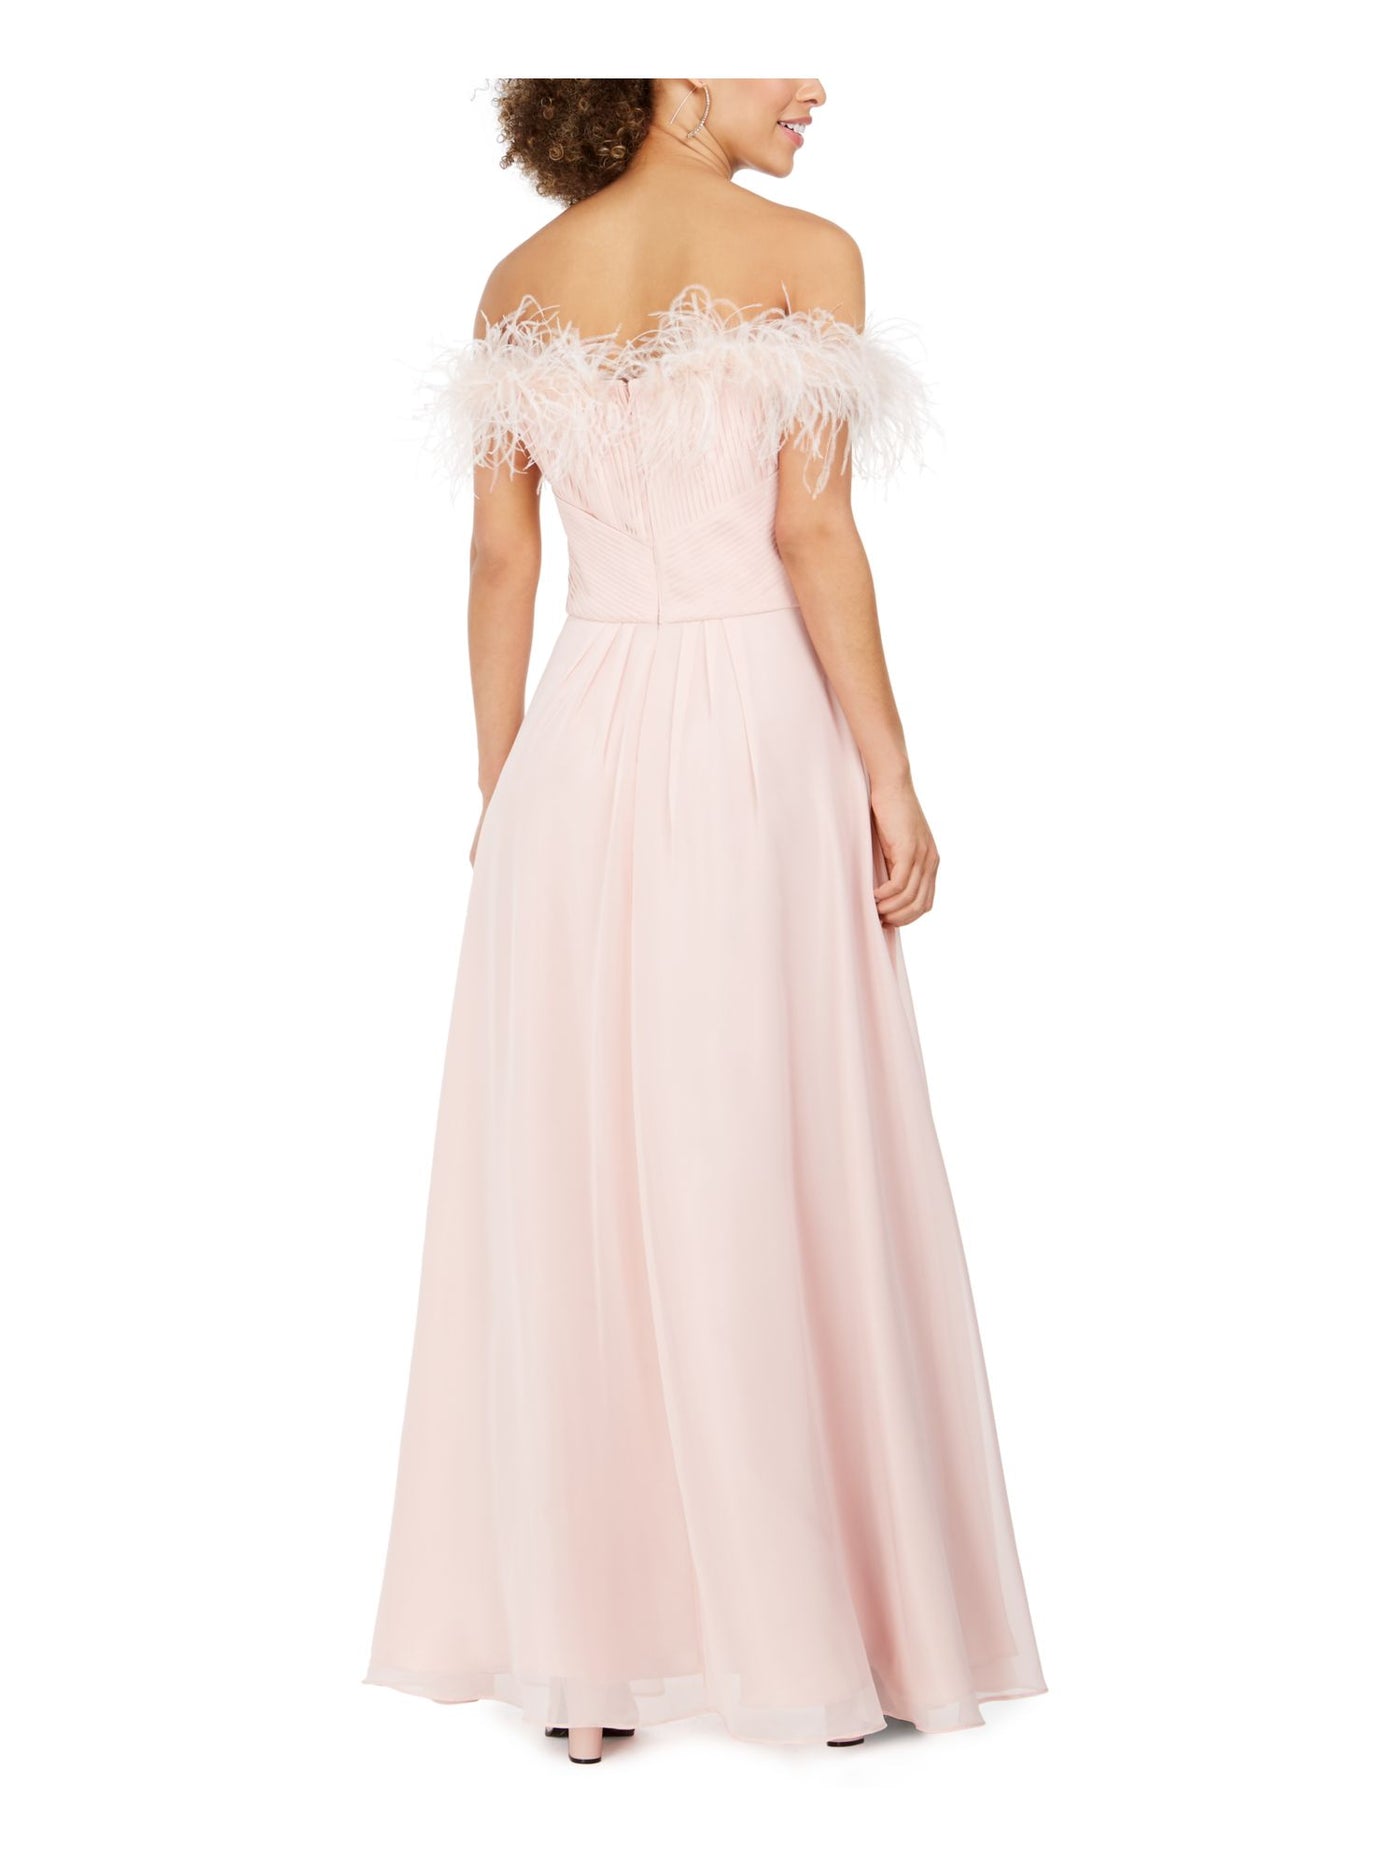 ELIZA J Womens Pink Pleated Zippered Faux-feathered Gown Off Shoulder Full-Length Formal Dress Juniors 10